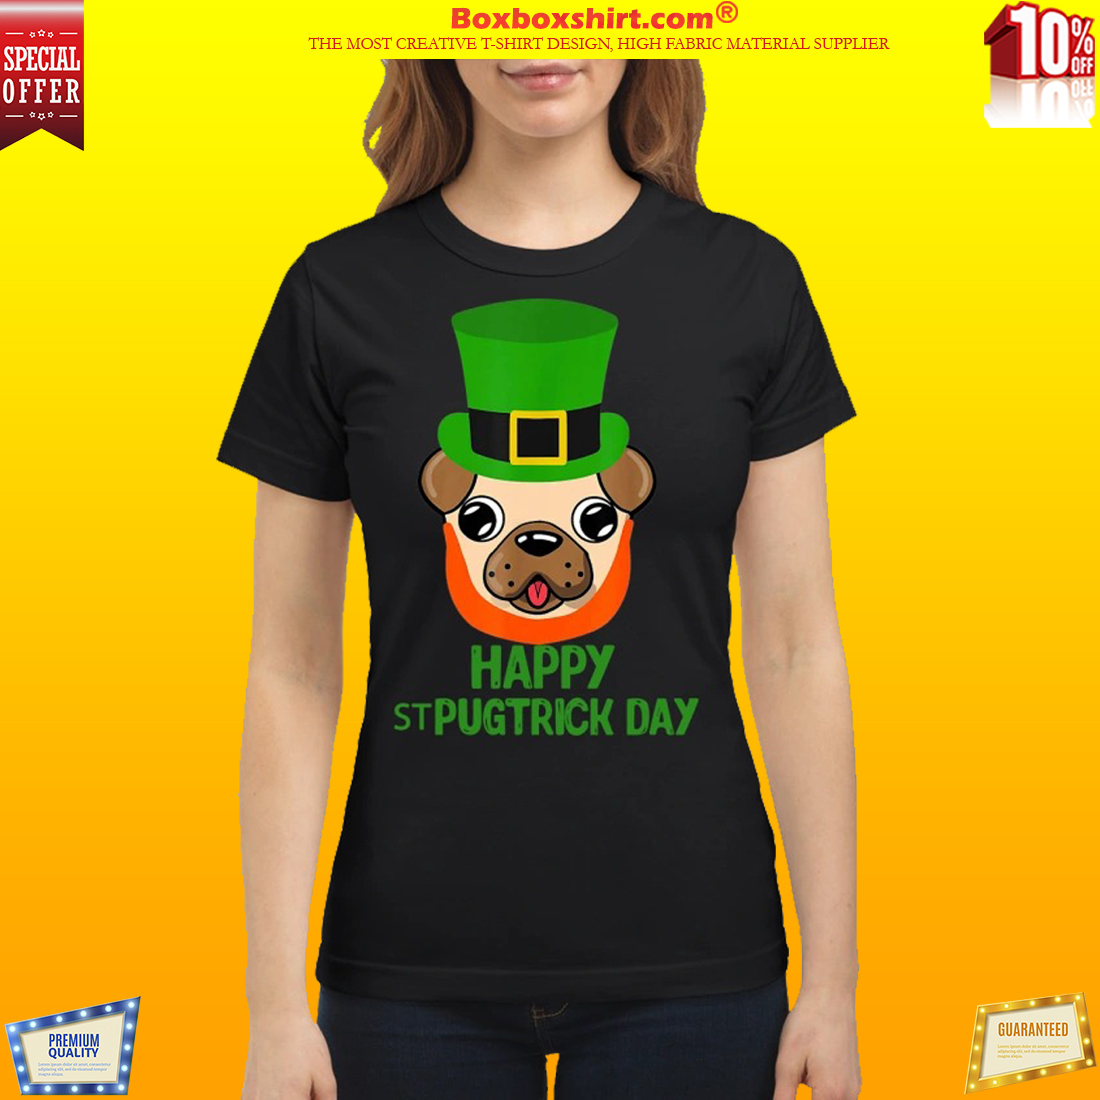 Happy St Pugtrick Day shirt